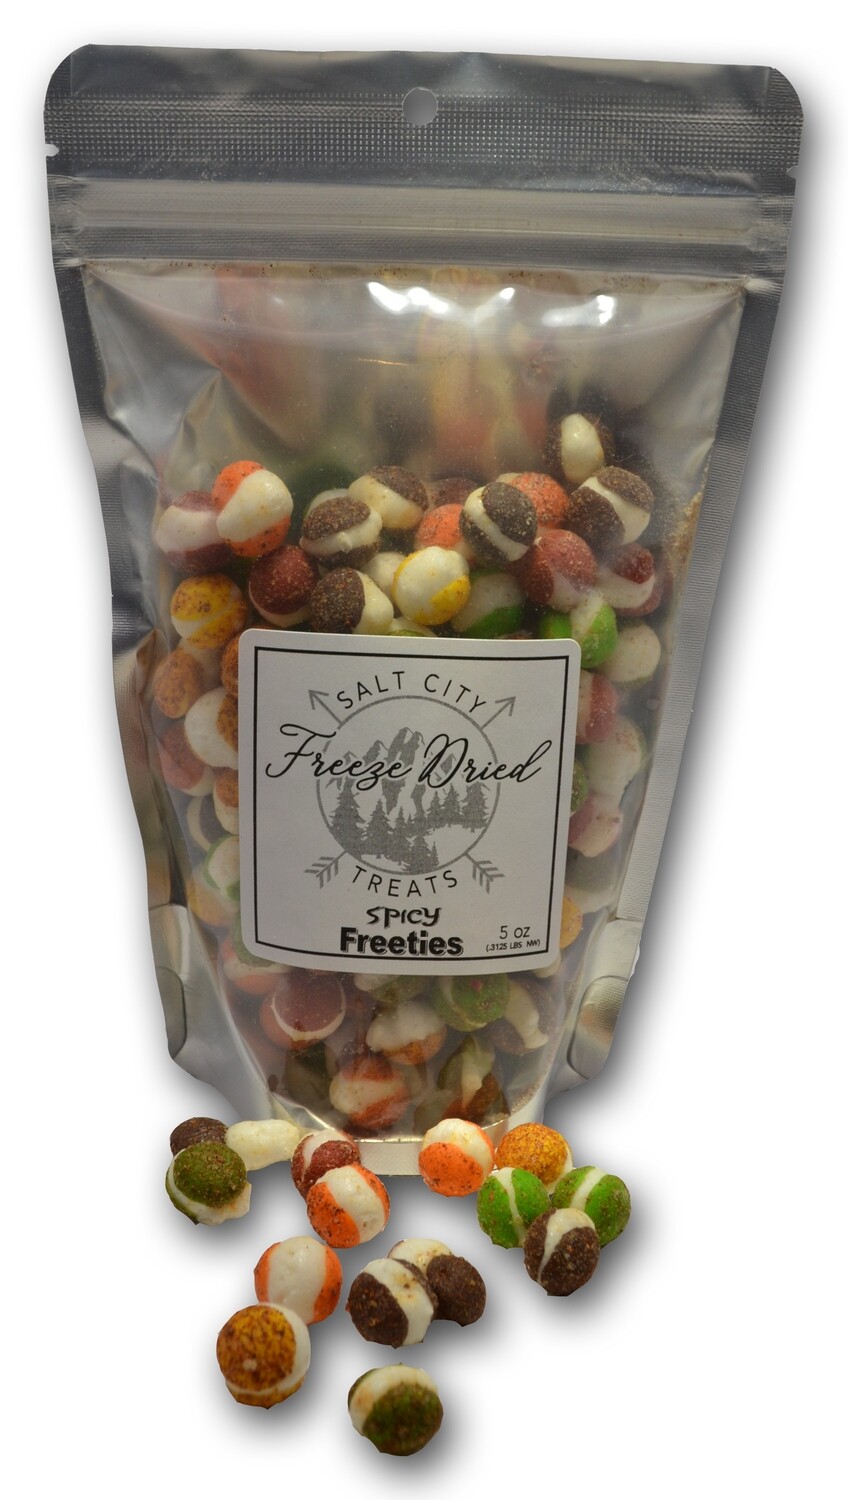 Spicy Freeties 5oz Resealable Bag Freeze dried candy